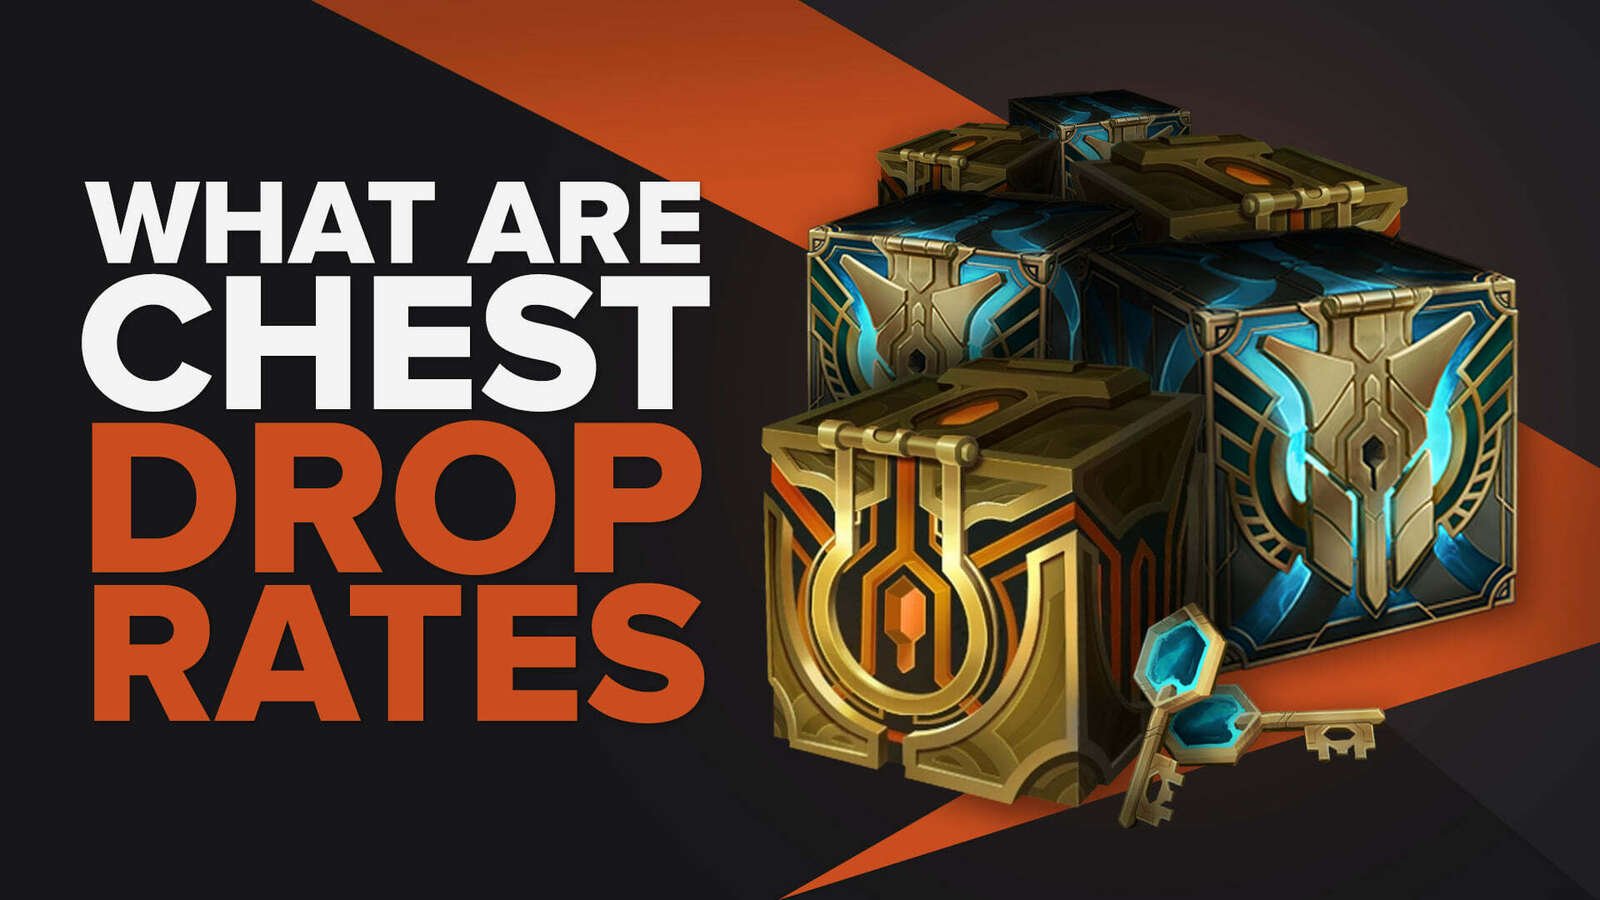 What are the Chest Drop Rates for Loot in League of Legends